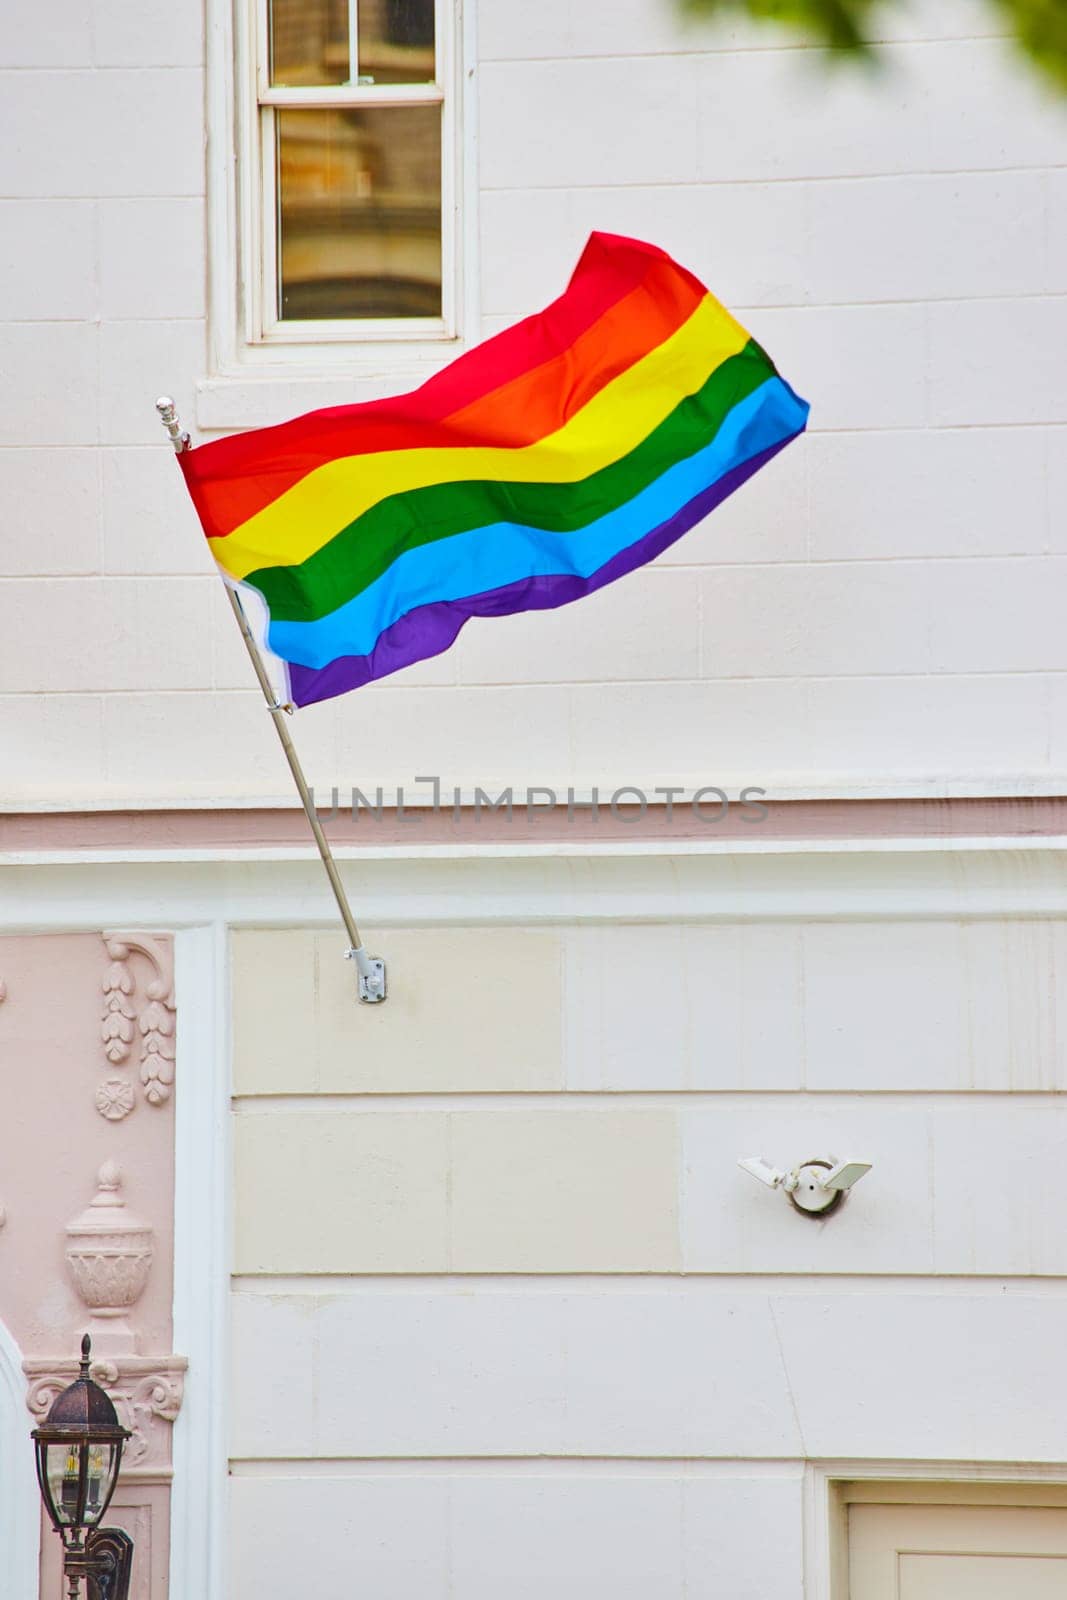 Rainbow pride flag stretched out in the wind against white building with white garage by njproductions